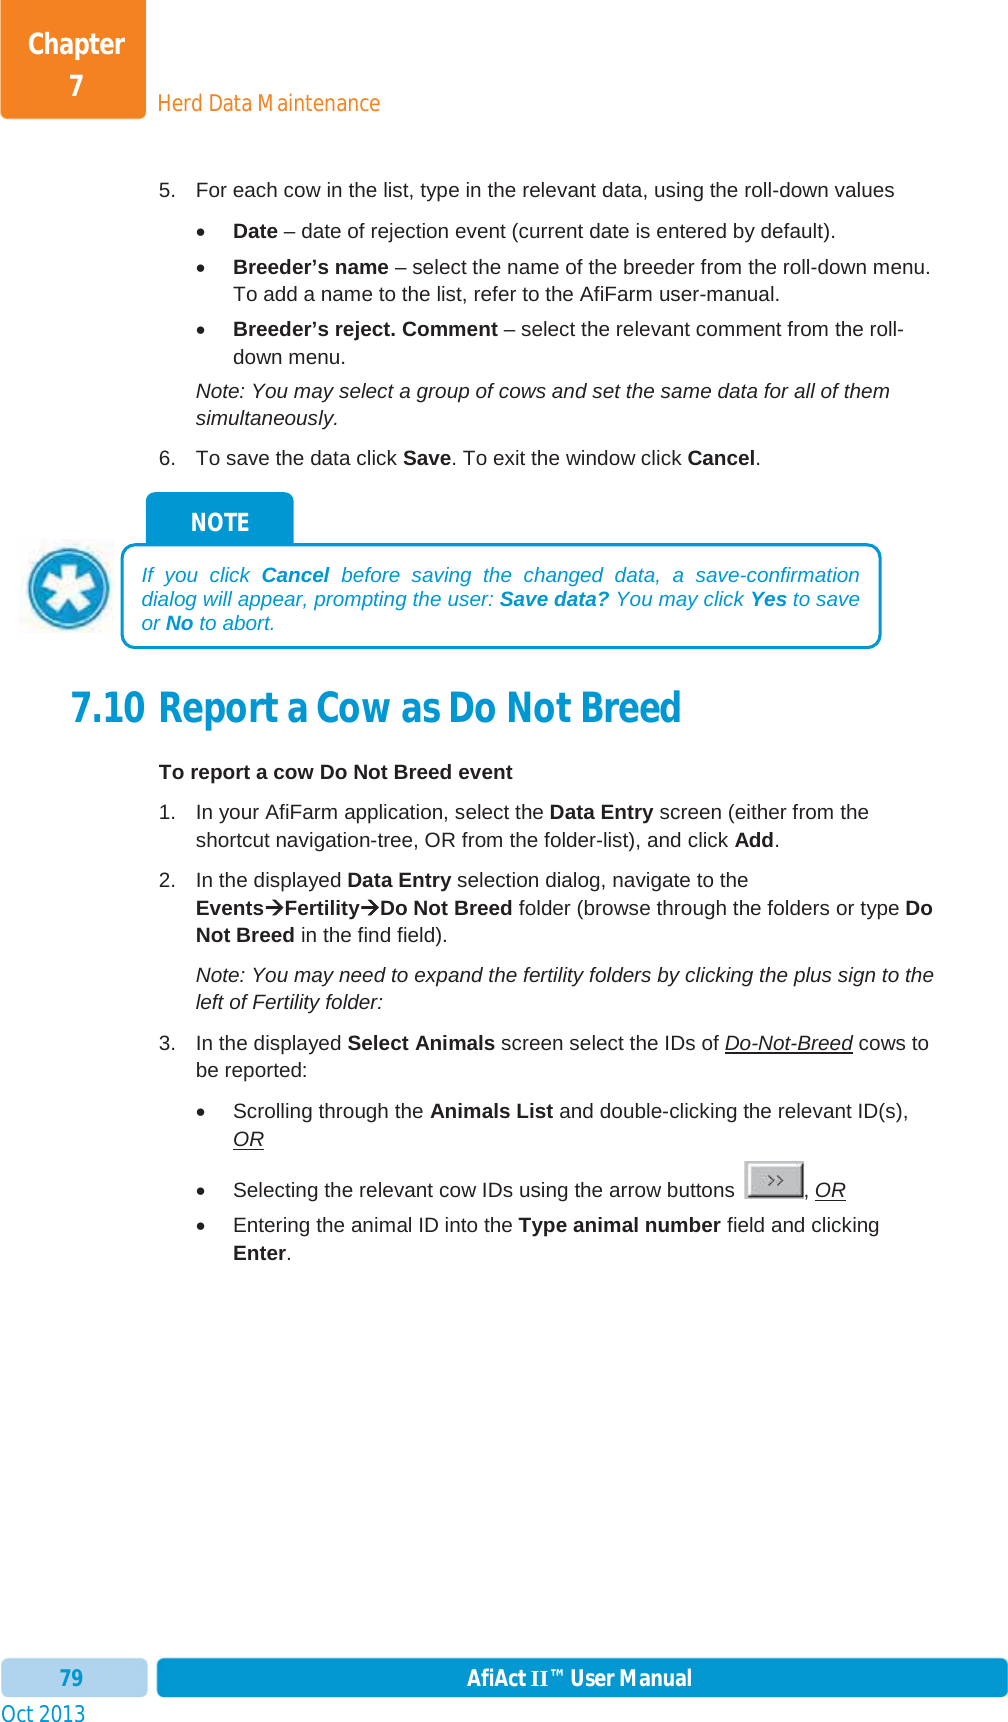 Oct 2013 AfiAct II™ User Manual79Herd Data MaintenanceChapter 75.  For each cow in the list, type in the relevant data, using the roll-down values xDate – date of rejection event (current date is entered by default). xBreeder’s name – select the name of the breeder from the roll-down menu. To add a name to the list, refer to the AfiFarm user-manual.  xBreeder’s reject. Comment – select the relevant comment from the roll-down menu. Note: You may select a group of cows and set the same data for all of them simultaneously. 6.  To save the data click Save. To exit the window click Cancel.7.10 Report a Cow as Do Not Breed  To report a cow Do Not Breed event 1.  In your AfiFarm application, select the Data Entry screen (either from the shortcut navigation-tree, OR from the folder-list), and click Add.2.  In the displayed Data Entry selection dialog, navigate to the EventsÆÆFertilityÆDo Not Breed folder (browse through the folders or type DoNot Breed in the find field). Note: You may need to expand the fertility folders by clicking the plus sign to the left of Fertility folder: 3.  In the displayed Select Animals screen select the IDs of Do-Not-Breed cows to be reported: x  Scrolling through the Animals List and double-clicking the relevant ID(s), ORx  Selecting the relevant cow IDs using the arrow buttons  , ORx  Entering the animal ID into the Type animal number field and clicking Enter.NOTE If you click Cancel before saving the changed data, a save-confirmation dialog will appear, prompting the user: Save data? You may click Yes to save or No to abort. 